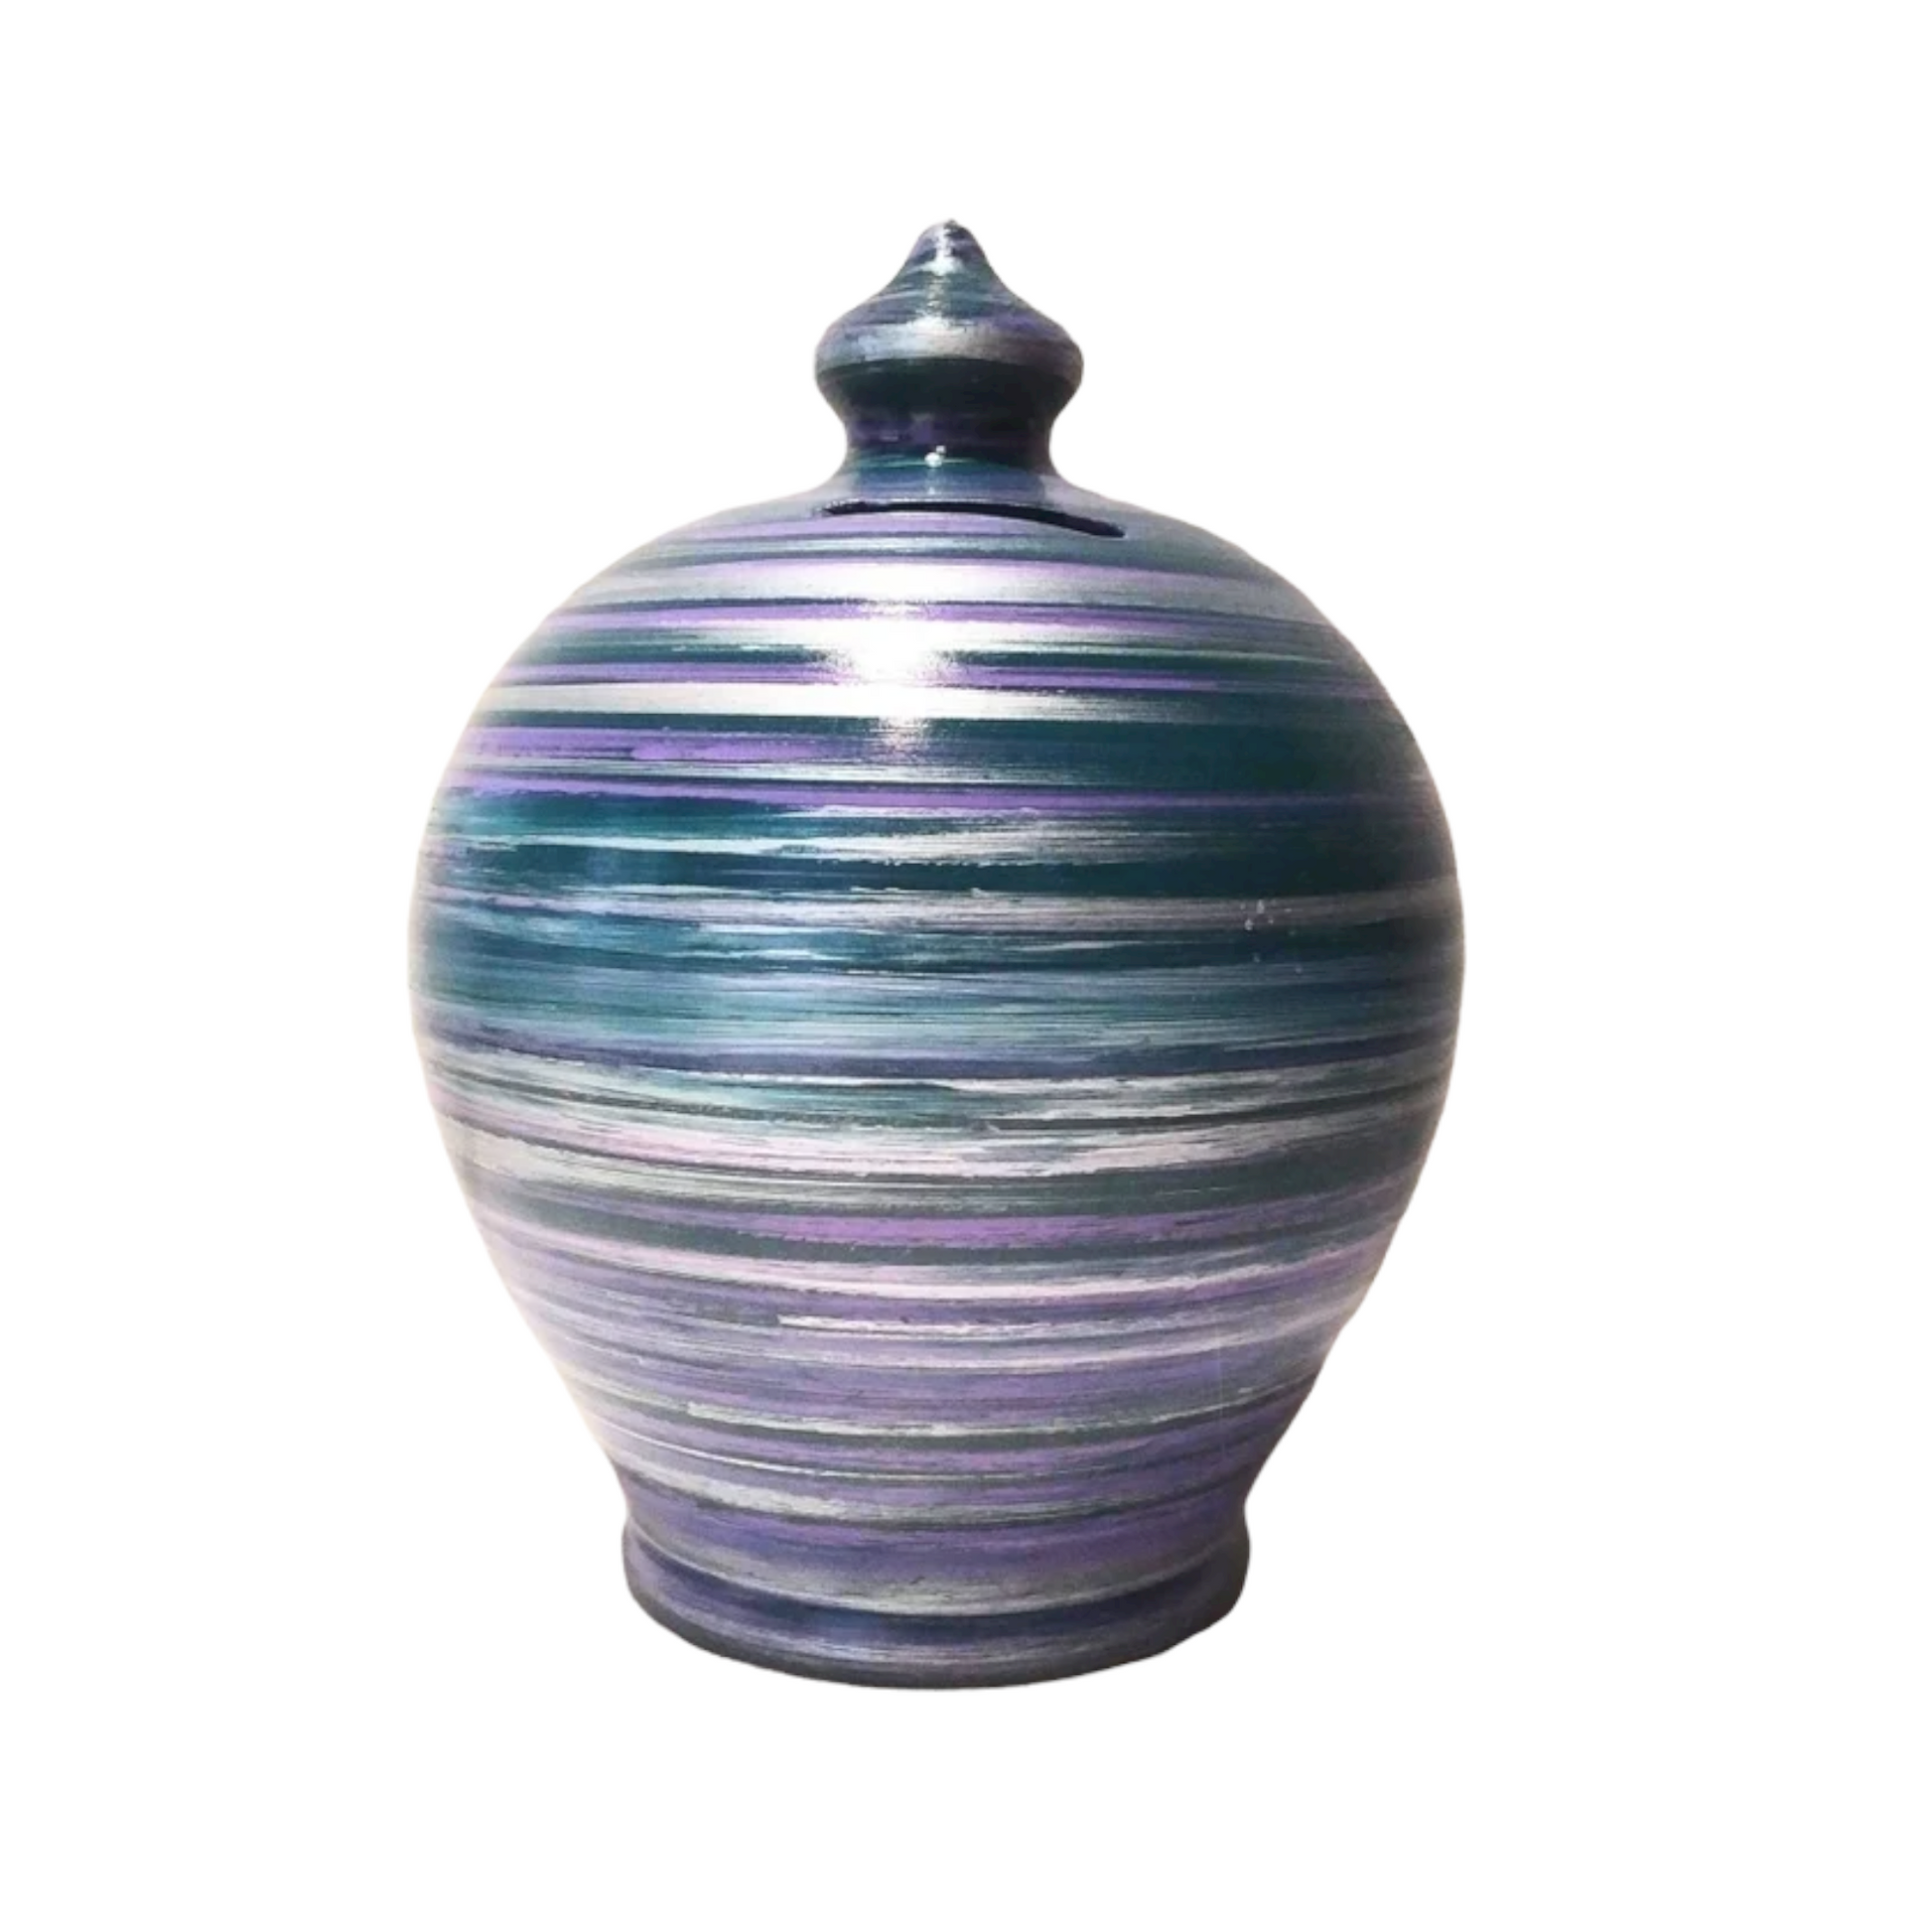 Handmade in Italy, the ideal gift for piggy bank lovers both kids and adults! Colors: green, purple, silver. 💰Size: 15 cm = 5.90 inches in height. Circumference: 40 cm = 15.74 inches. With hole and stopper plug, or without hole.